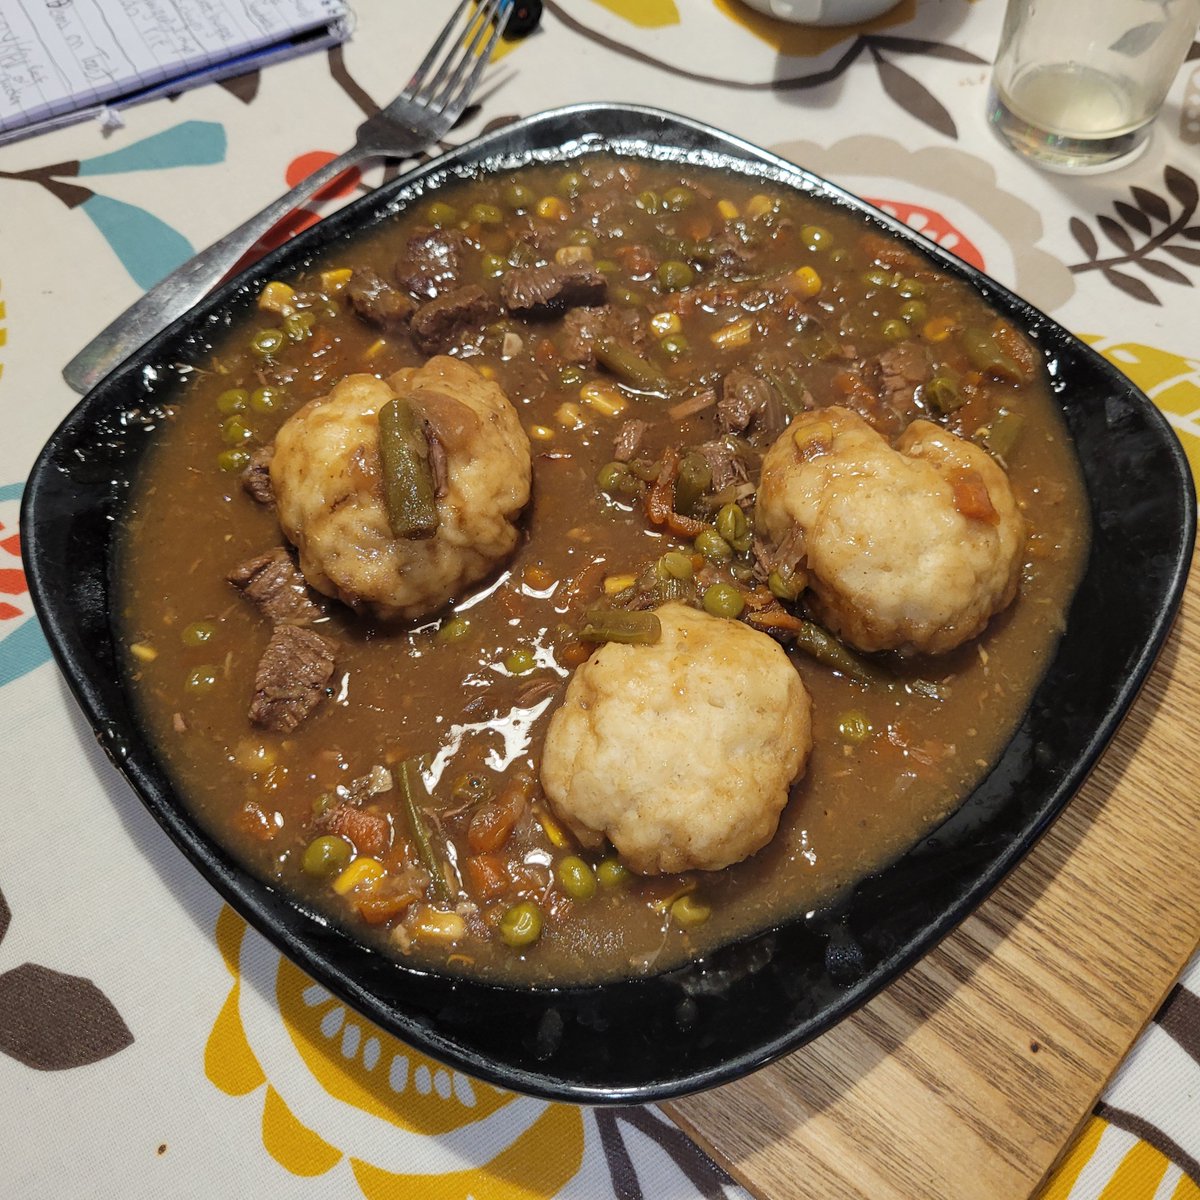 Beef stew and dumplings, with fresh, homemade, buttered roll.

#greatBritishfood